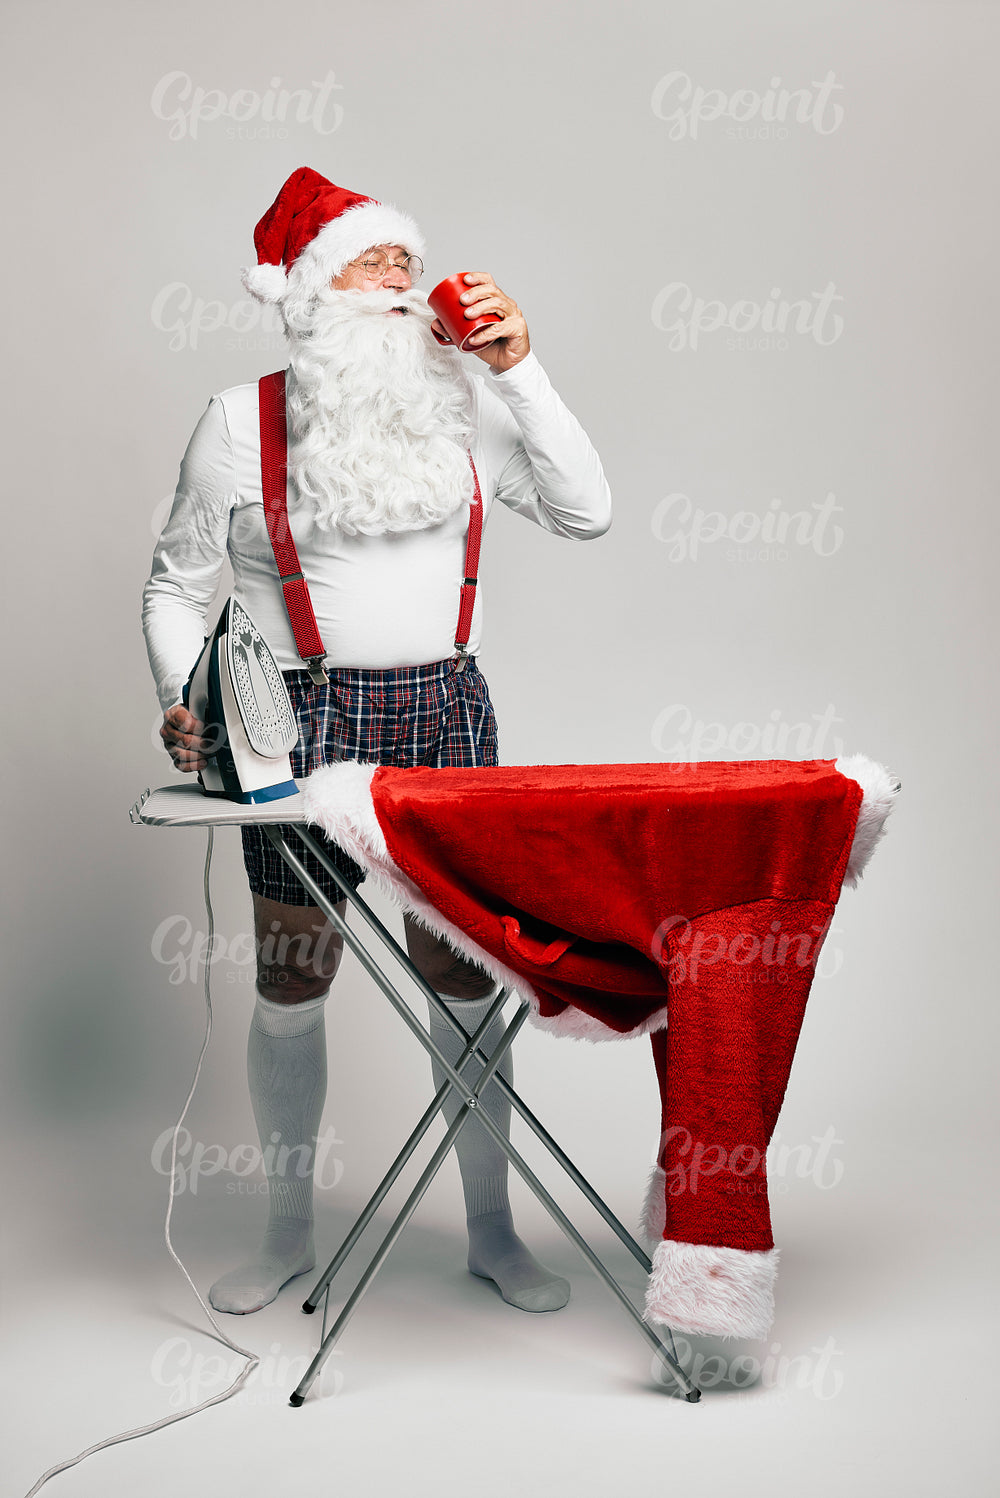 Caucasian Santa Claus ironing trousers for Christmas and drinking hot chocolate 